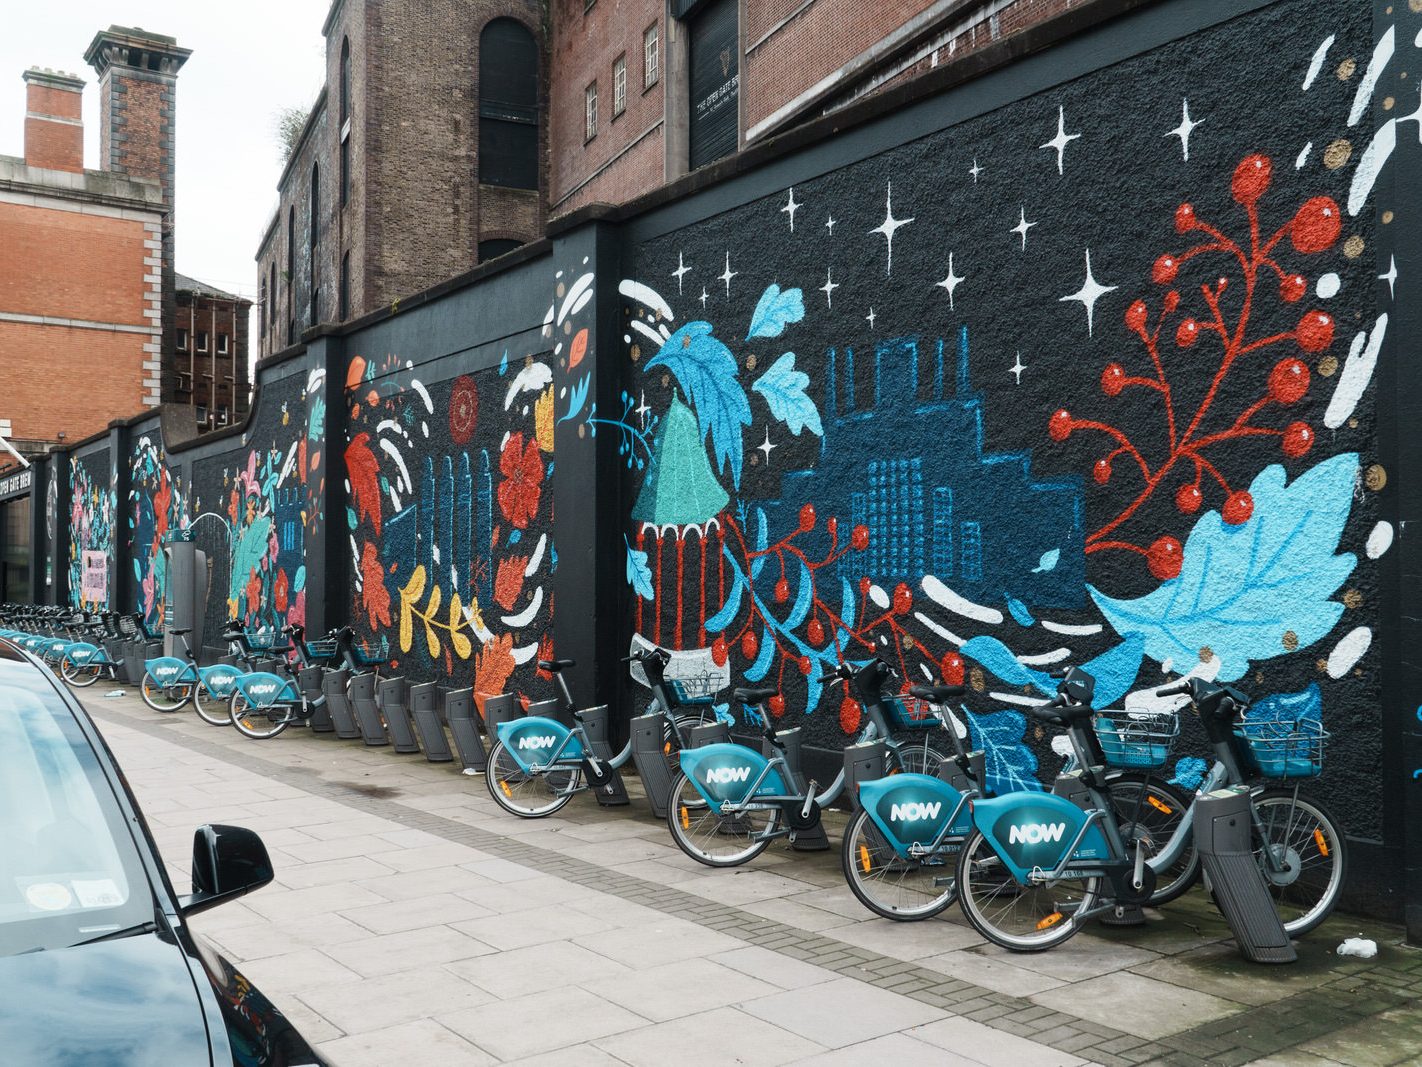 TWO FOR THE PRICE OF ONE [DUBLINBIKES DOCKING STATION 75 AND A MURAL BY HOLLY PEREIRA]-229685-1